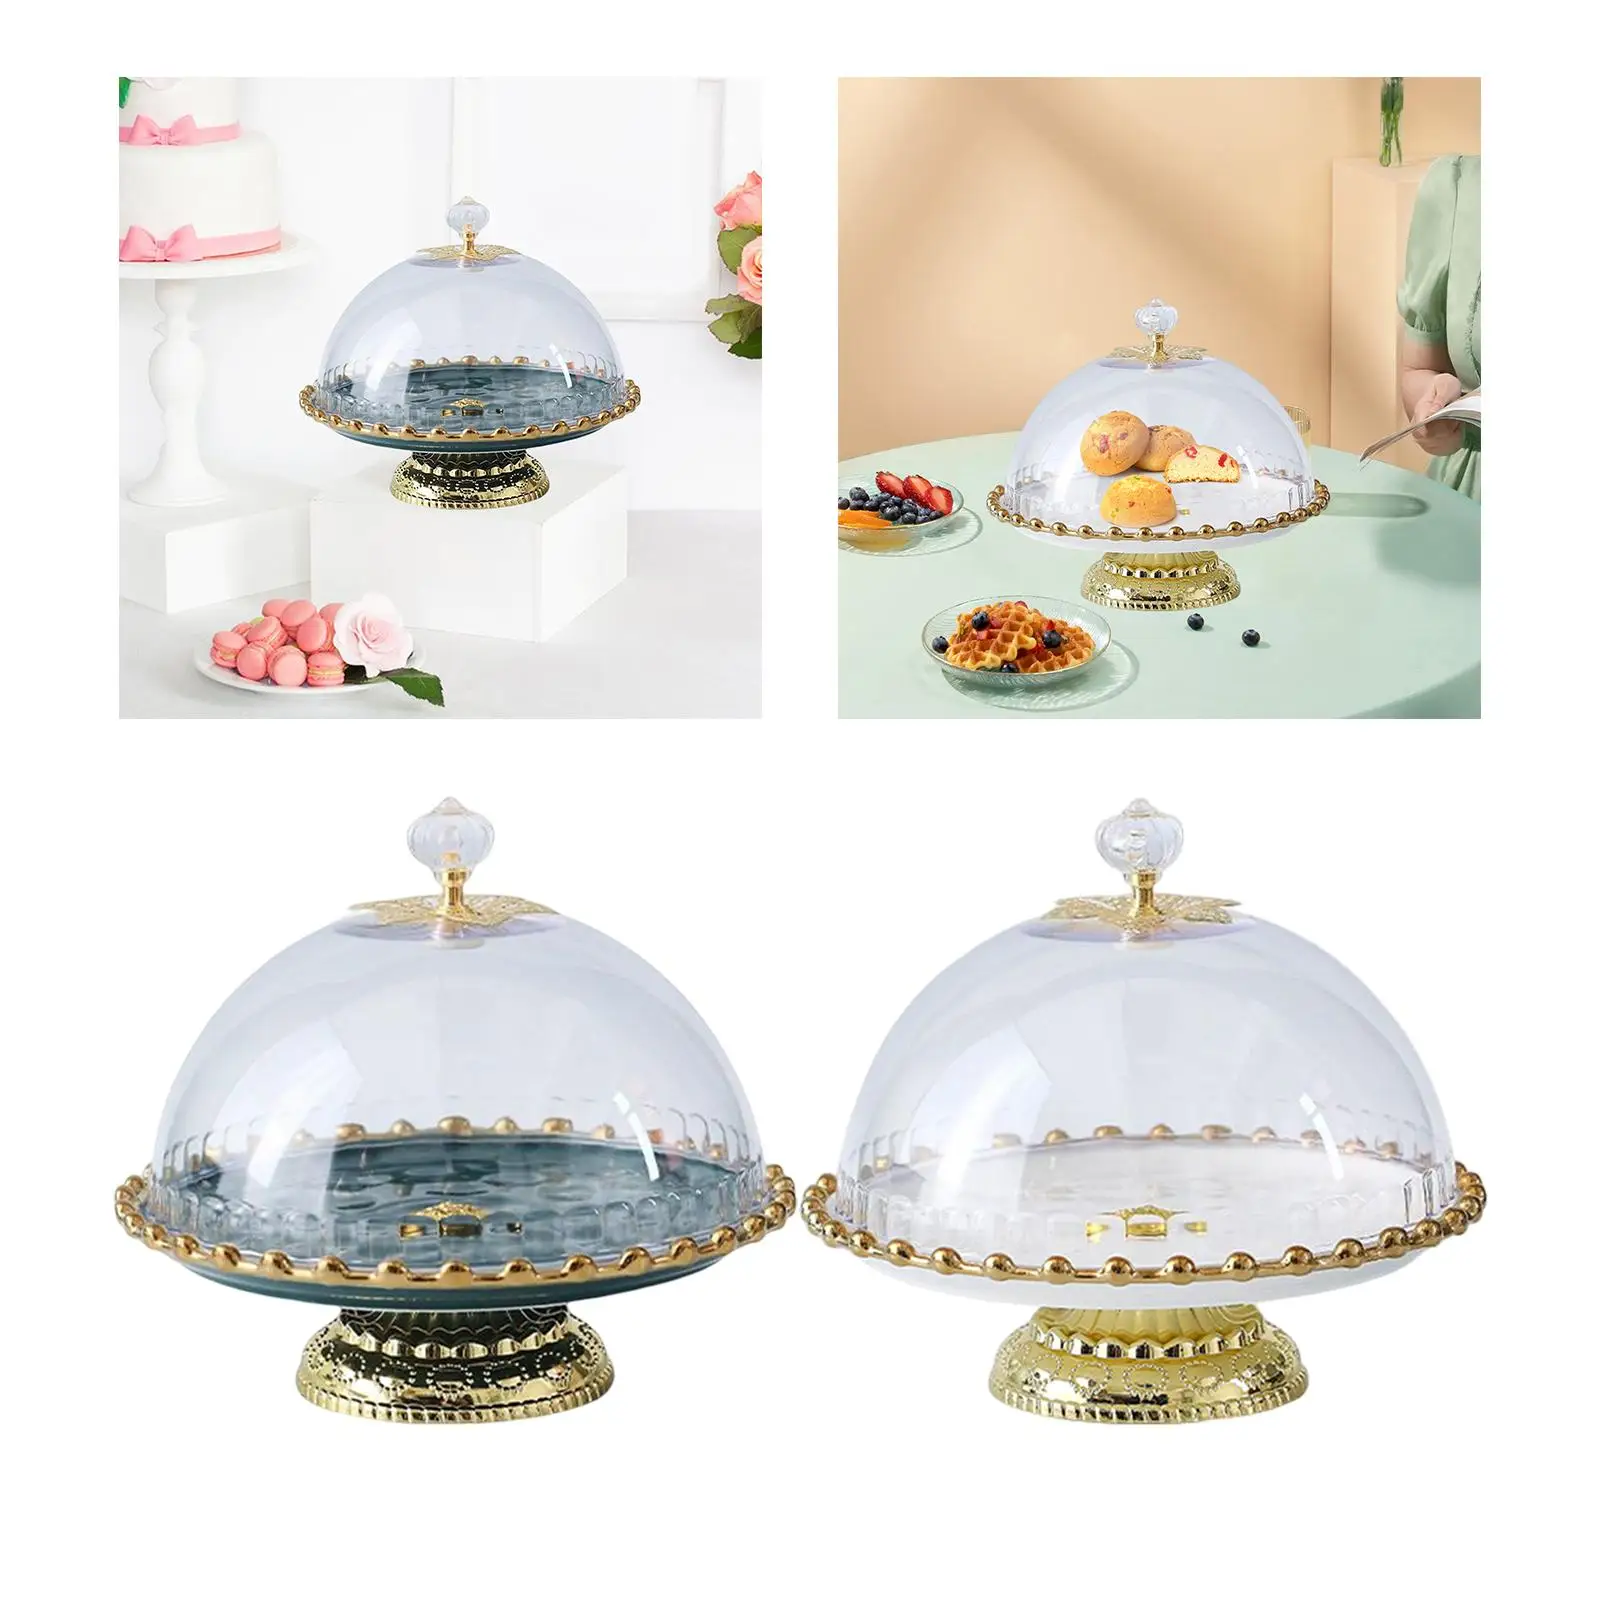 Nordic Ceramic Cake Stand Cupcake Plate with Dome Serving Platter Candy Plate Dish Containers Fruit Rack for Dessert Party Bread